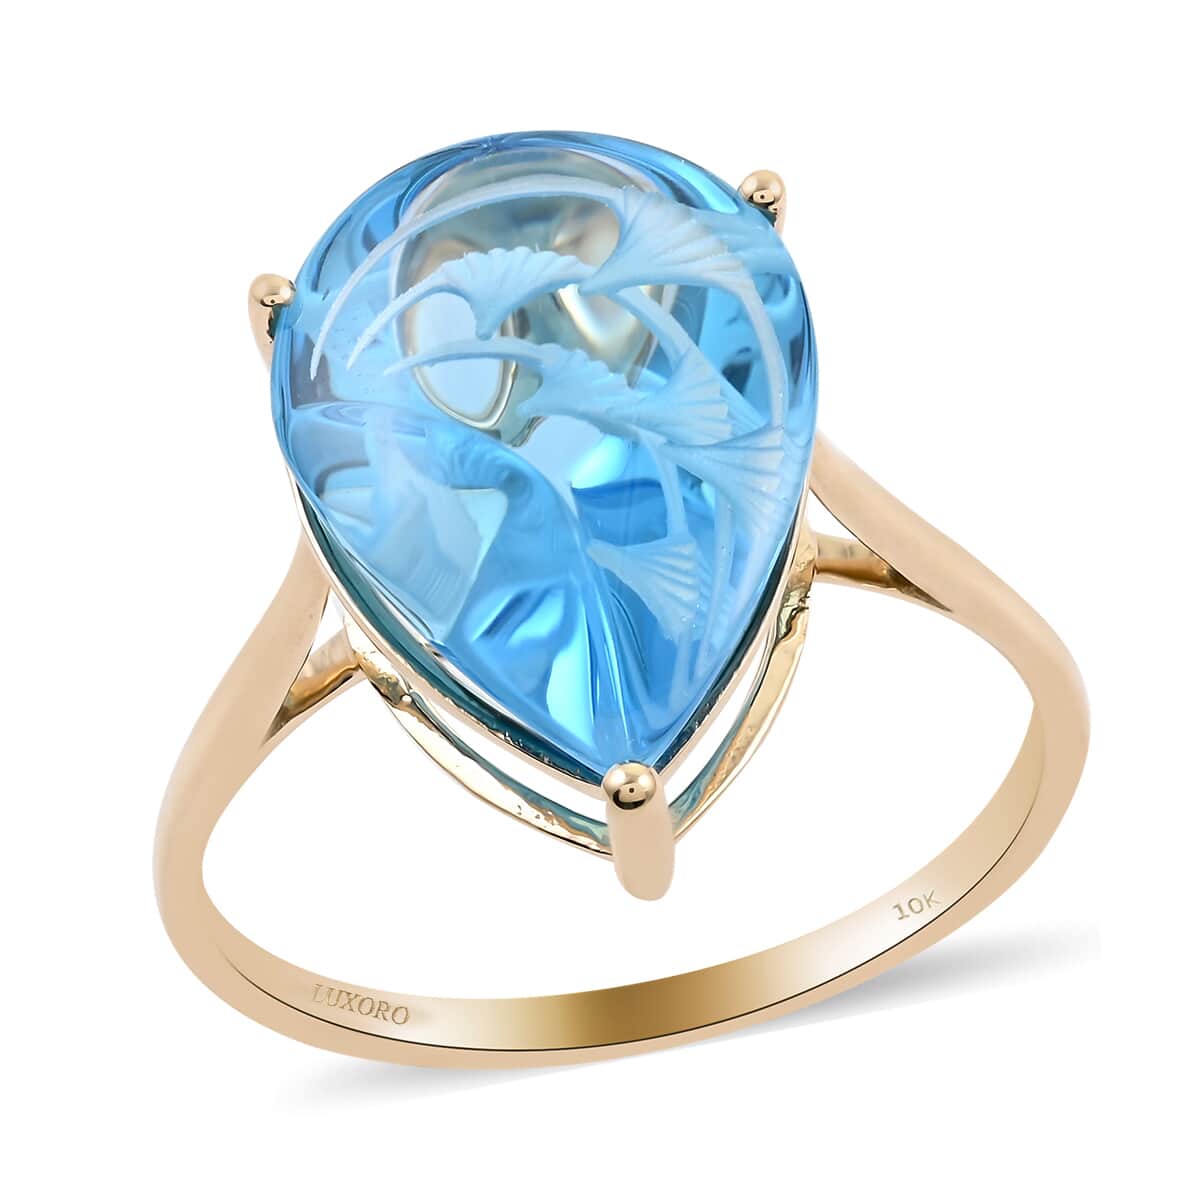 Certified & Appraised LUXORO 10K Yellow Gold Fancy Hand Carved AAA Electric Blue Topaz Solitaire Ring (Size 7.0) 2.15 Grams 9.10 ctw image number 0